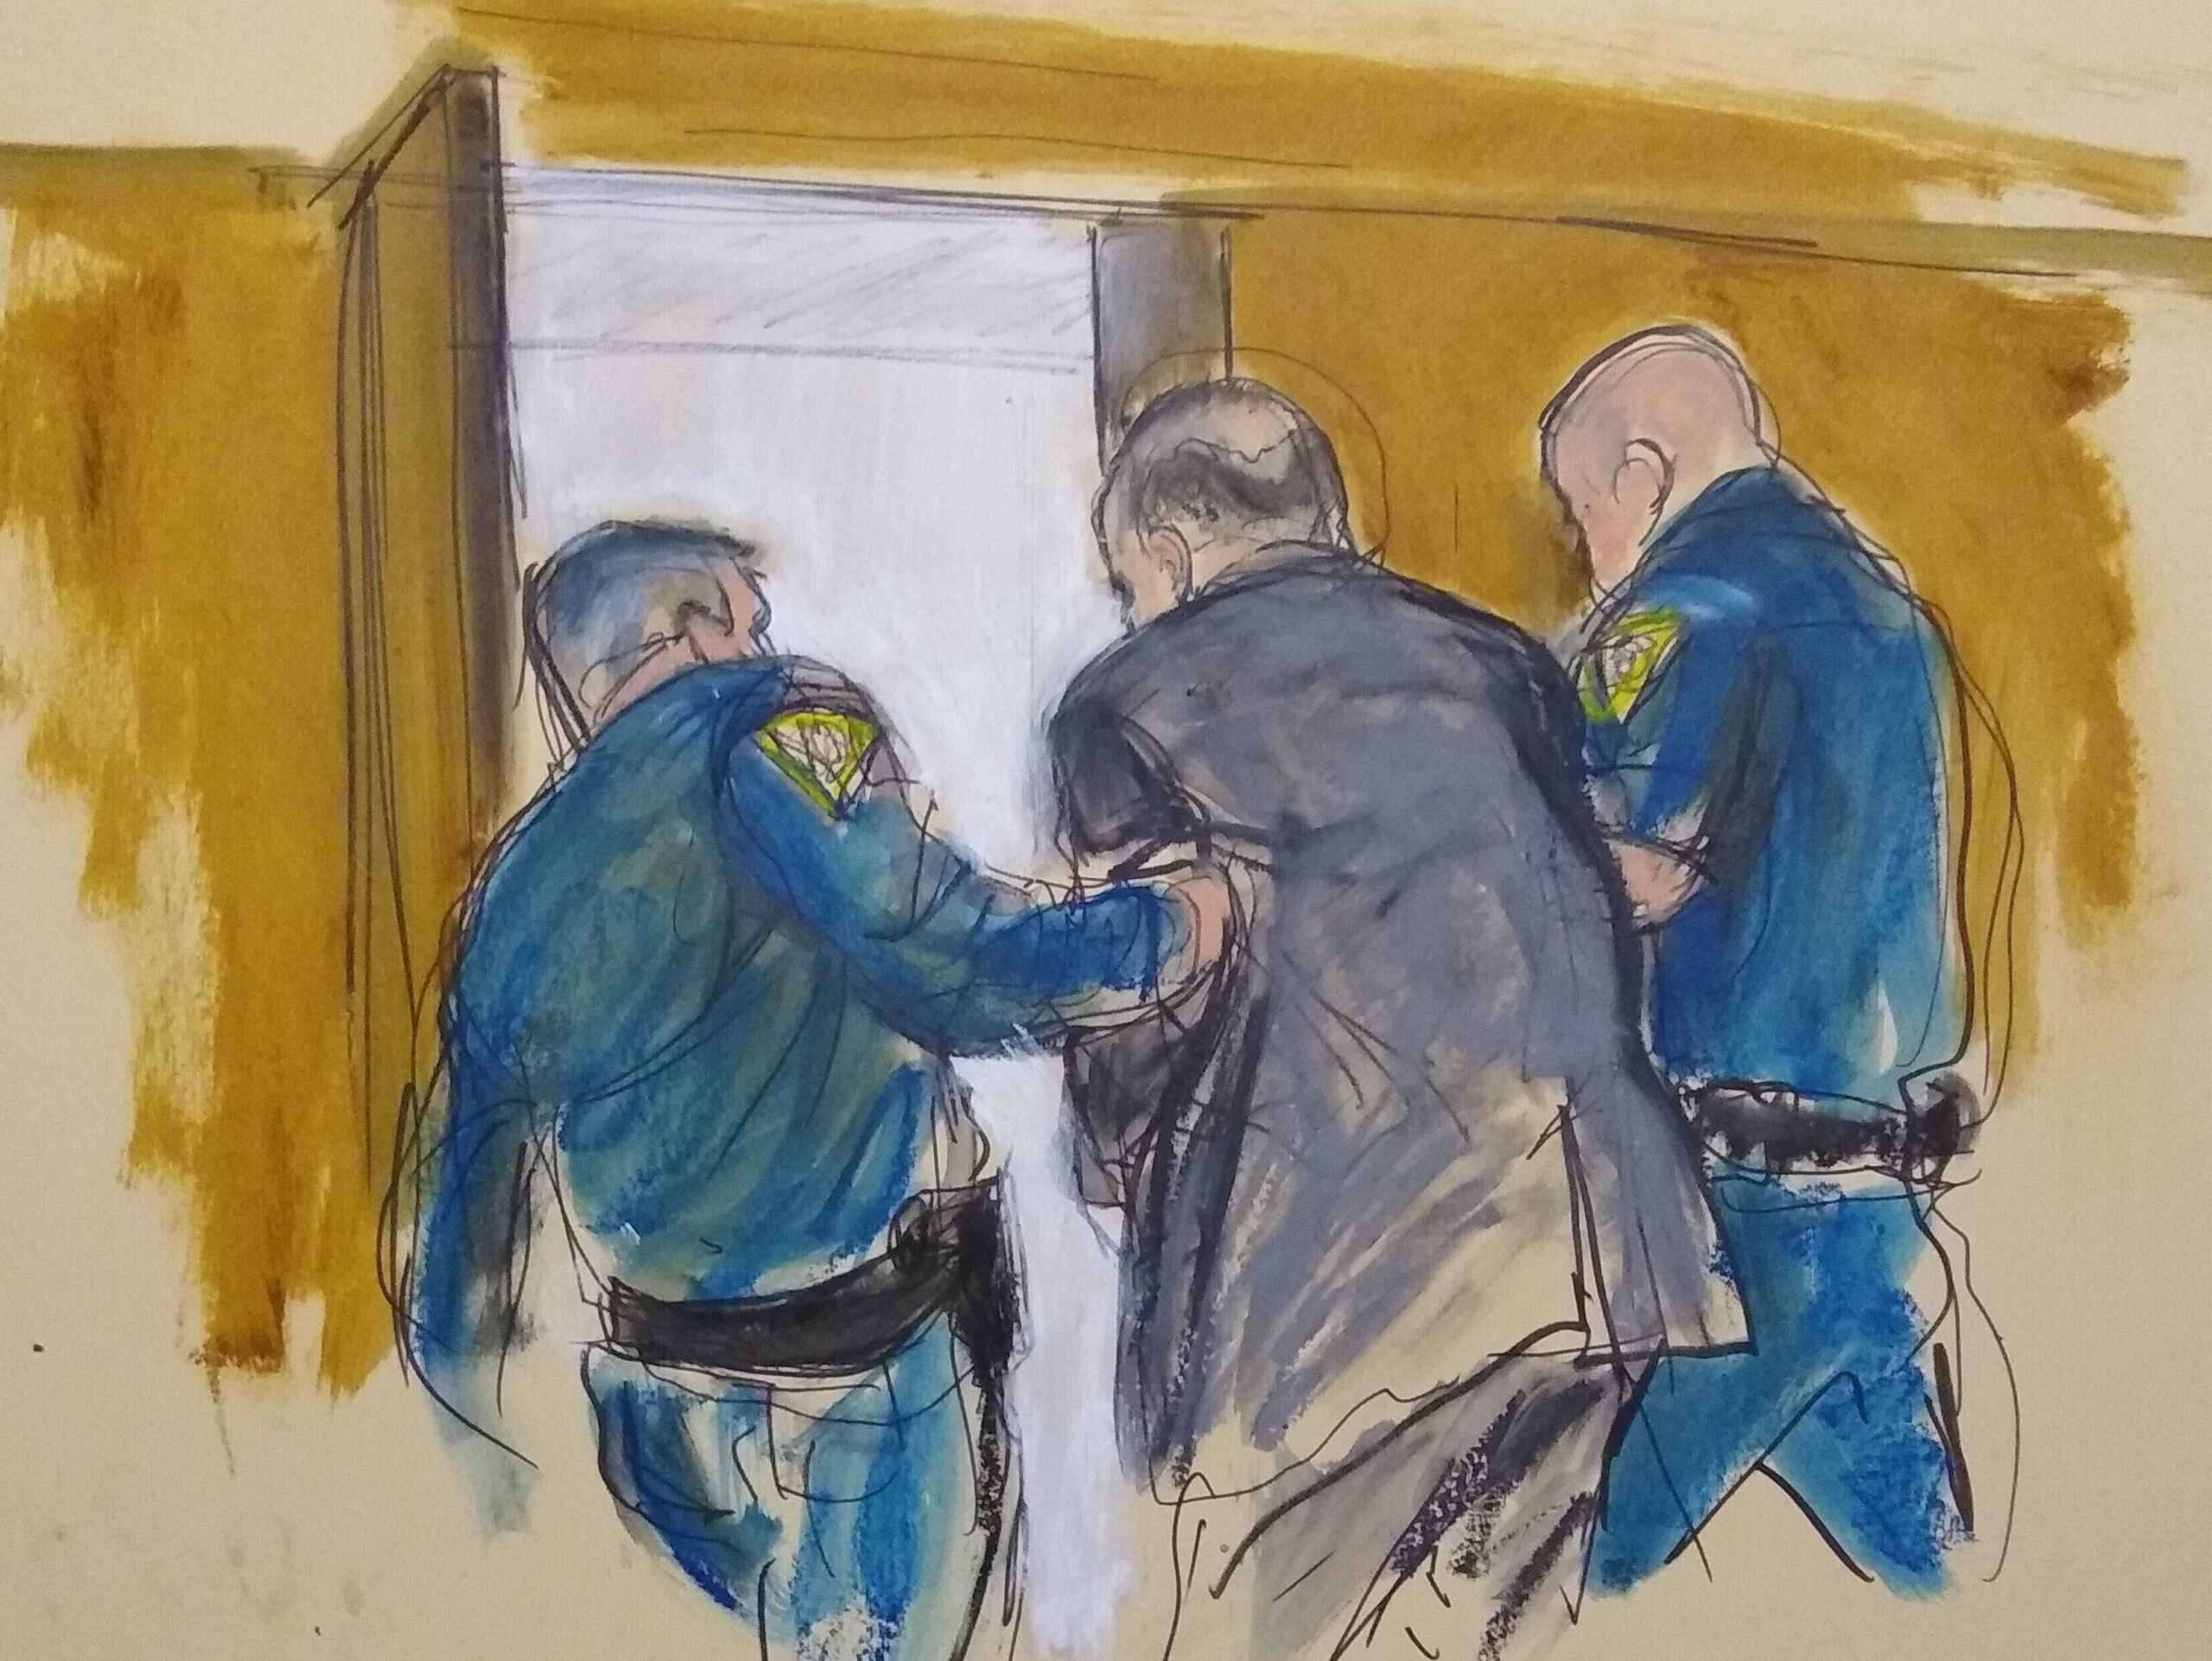 Sketch of Harvey Weinstein led by police officers out of a New York courtroom